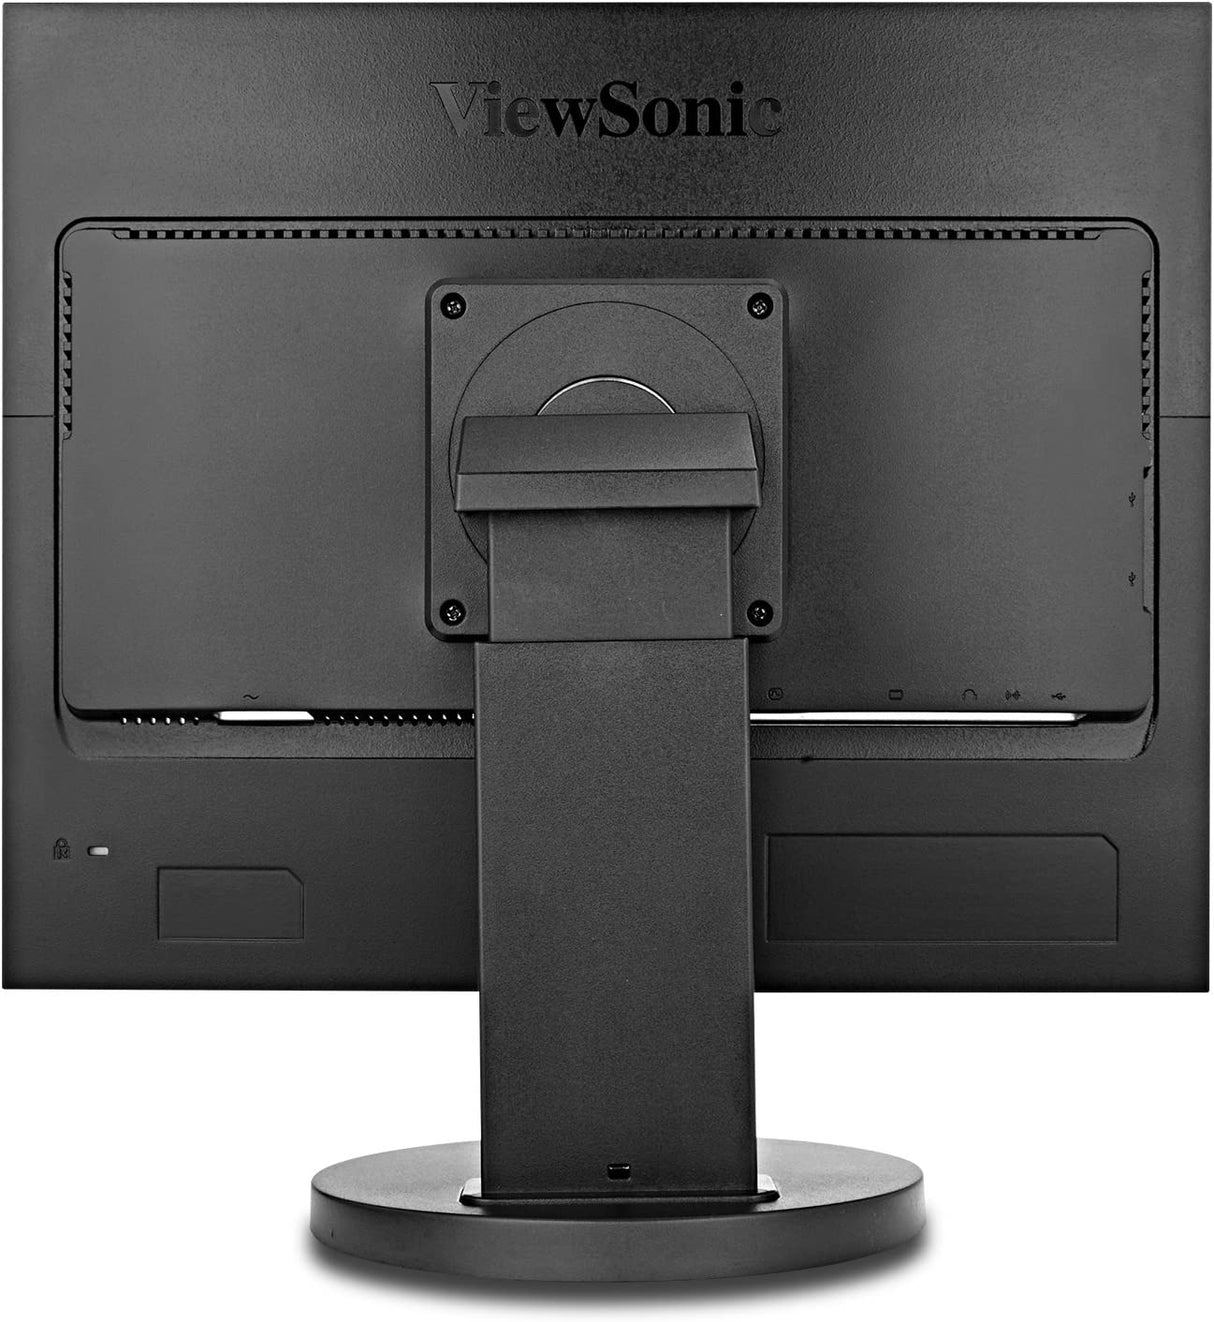 ViewSonic VG939SM 19 Inch IPS 1024p Ergonomic Monitor with DVI and VGA for Home and Office, Black 19-Inch